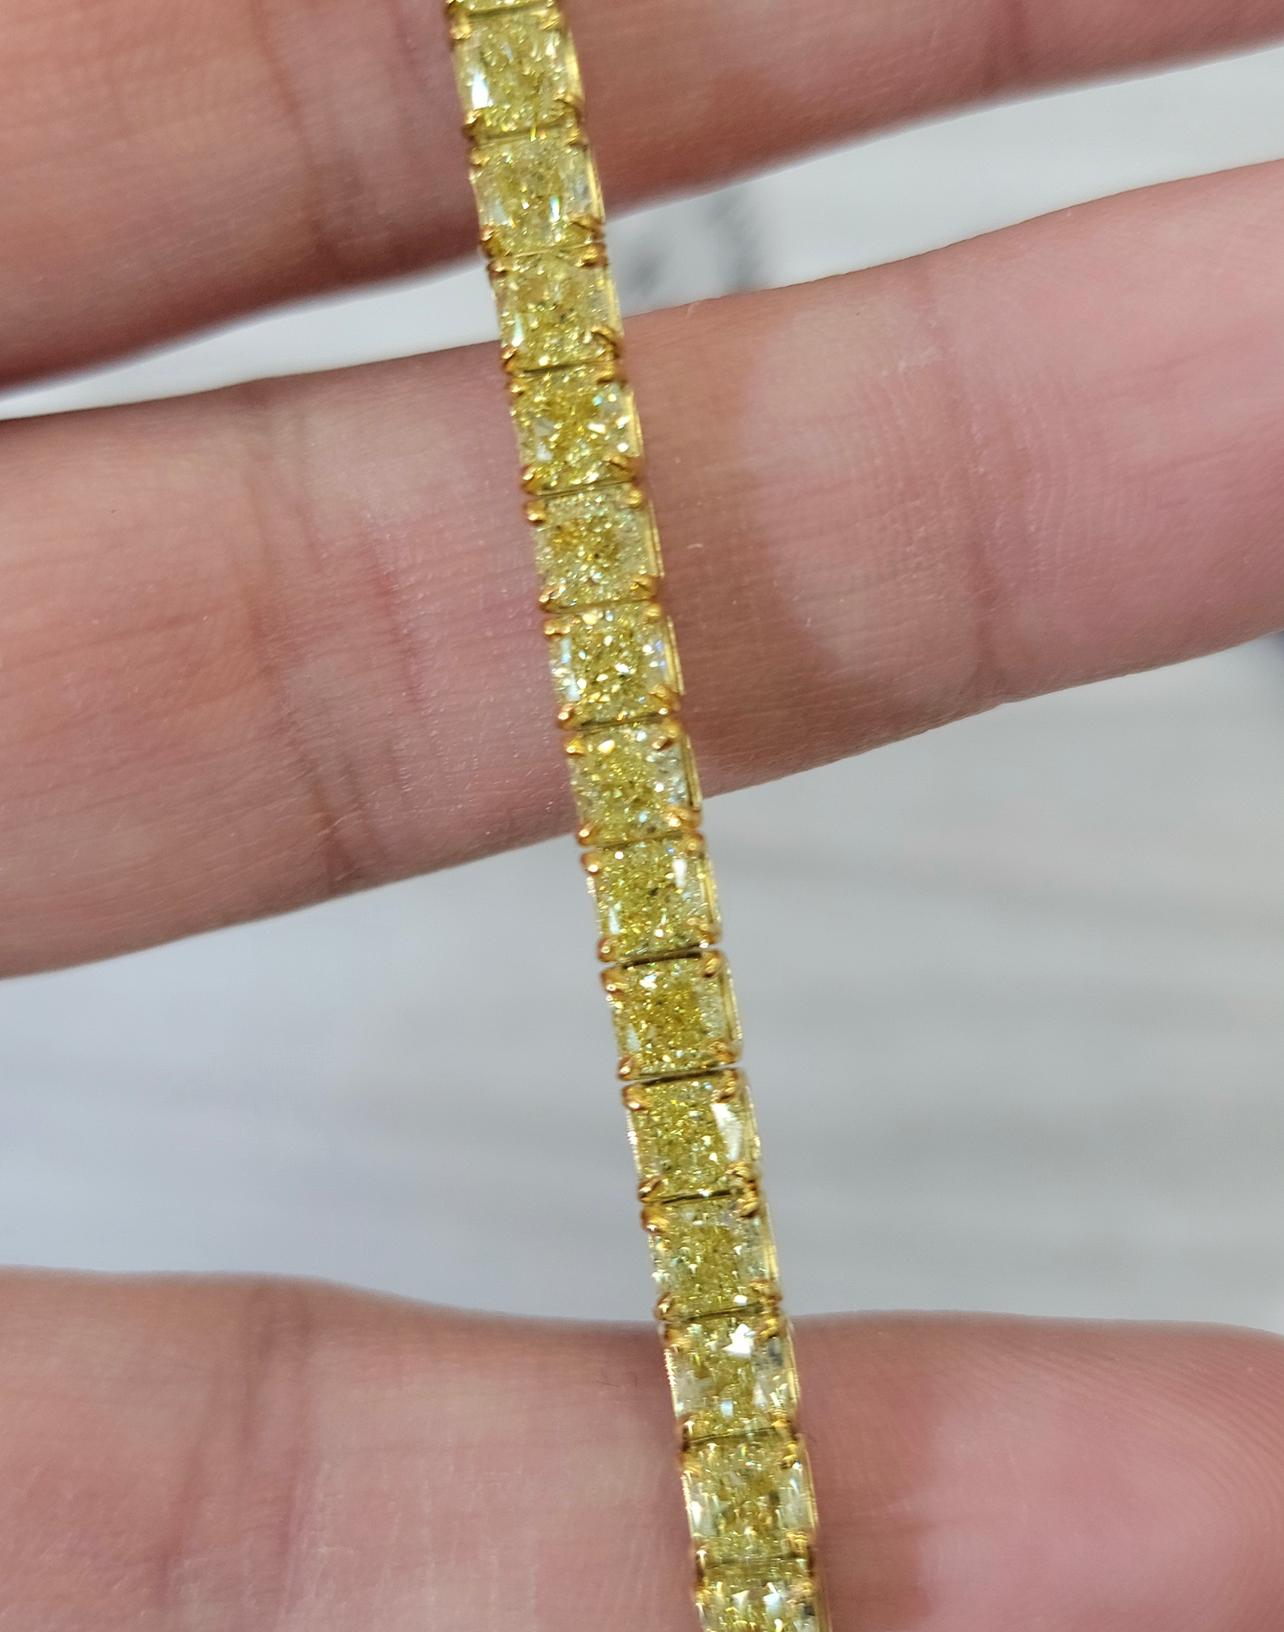 16ct Fancy Intense Yellow Cushion Diamond Tennis Bracelet In New Condition For Sale In New York, NY